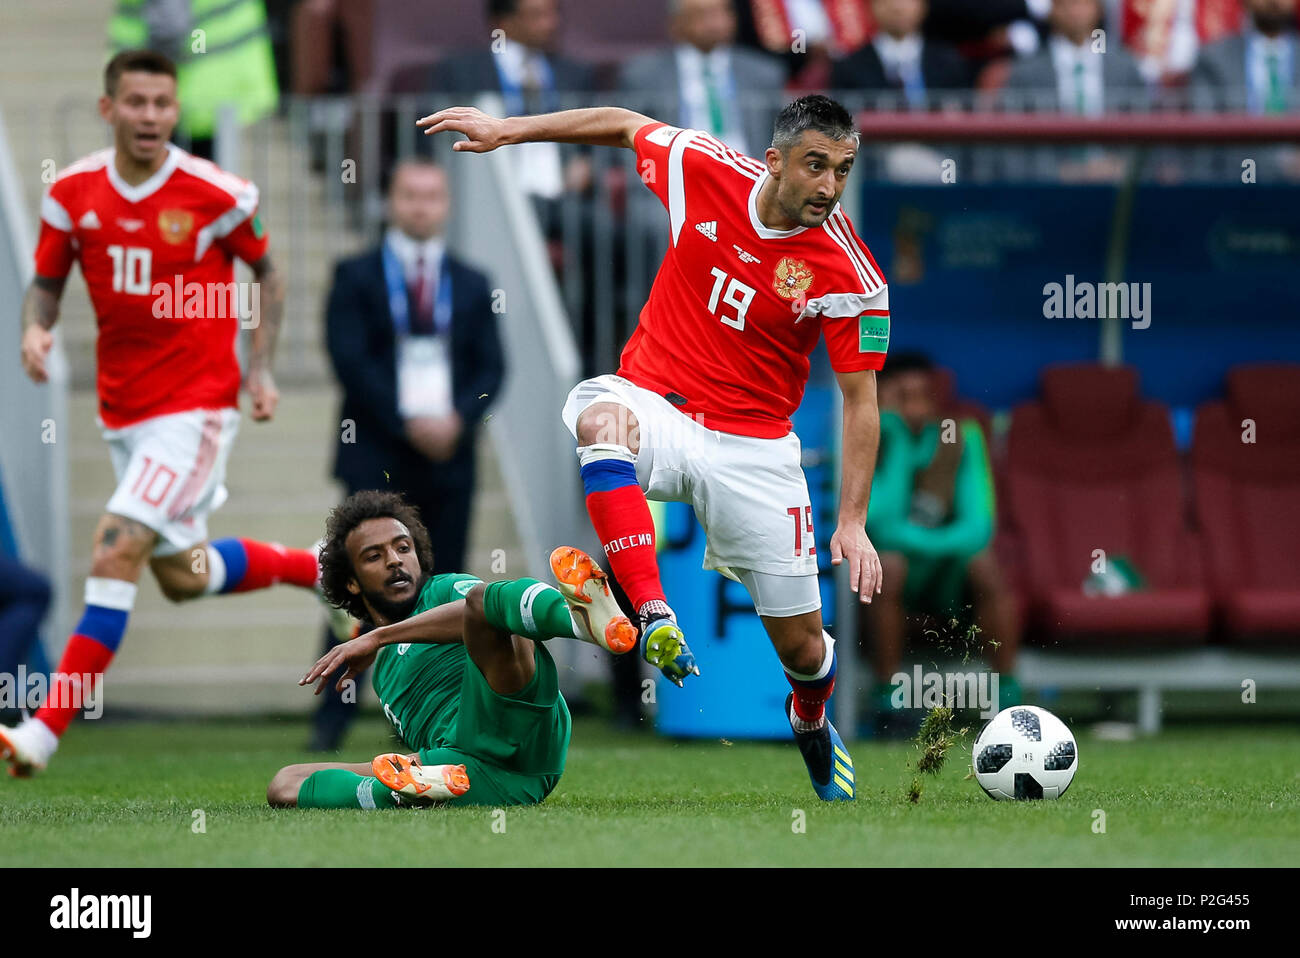 Moscow, Russia. 14th June 2018. Yasser Al-Shahrani of Saudi Arabia and Aleksandr Samedov of Russia during the 2018 FIFA World Cup Group A match between Russia and Saudi Arabia at Luzhniki Stadium on June 14th 2018 in Moscow, Russia. Credit: PHC Images/Alamy Live News Stock Photo